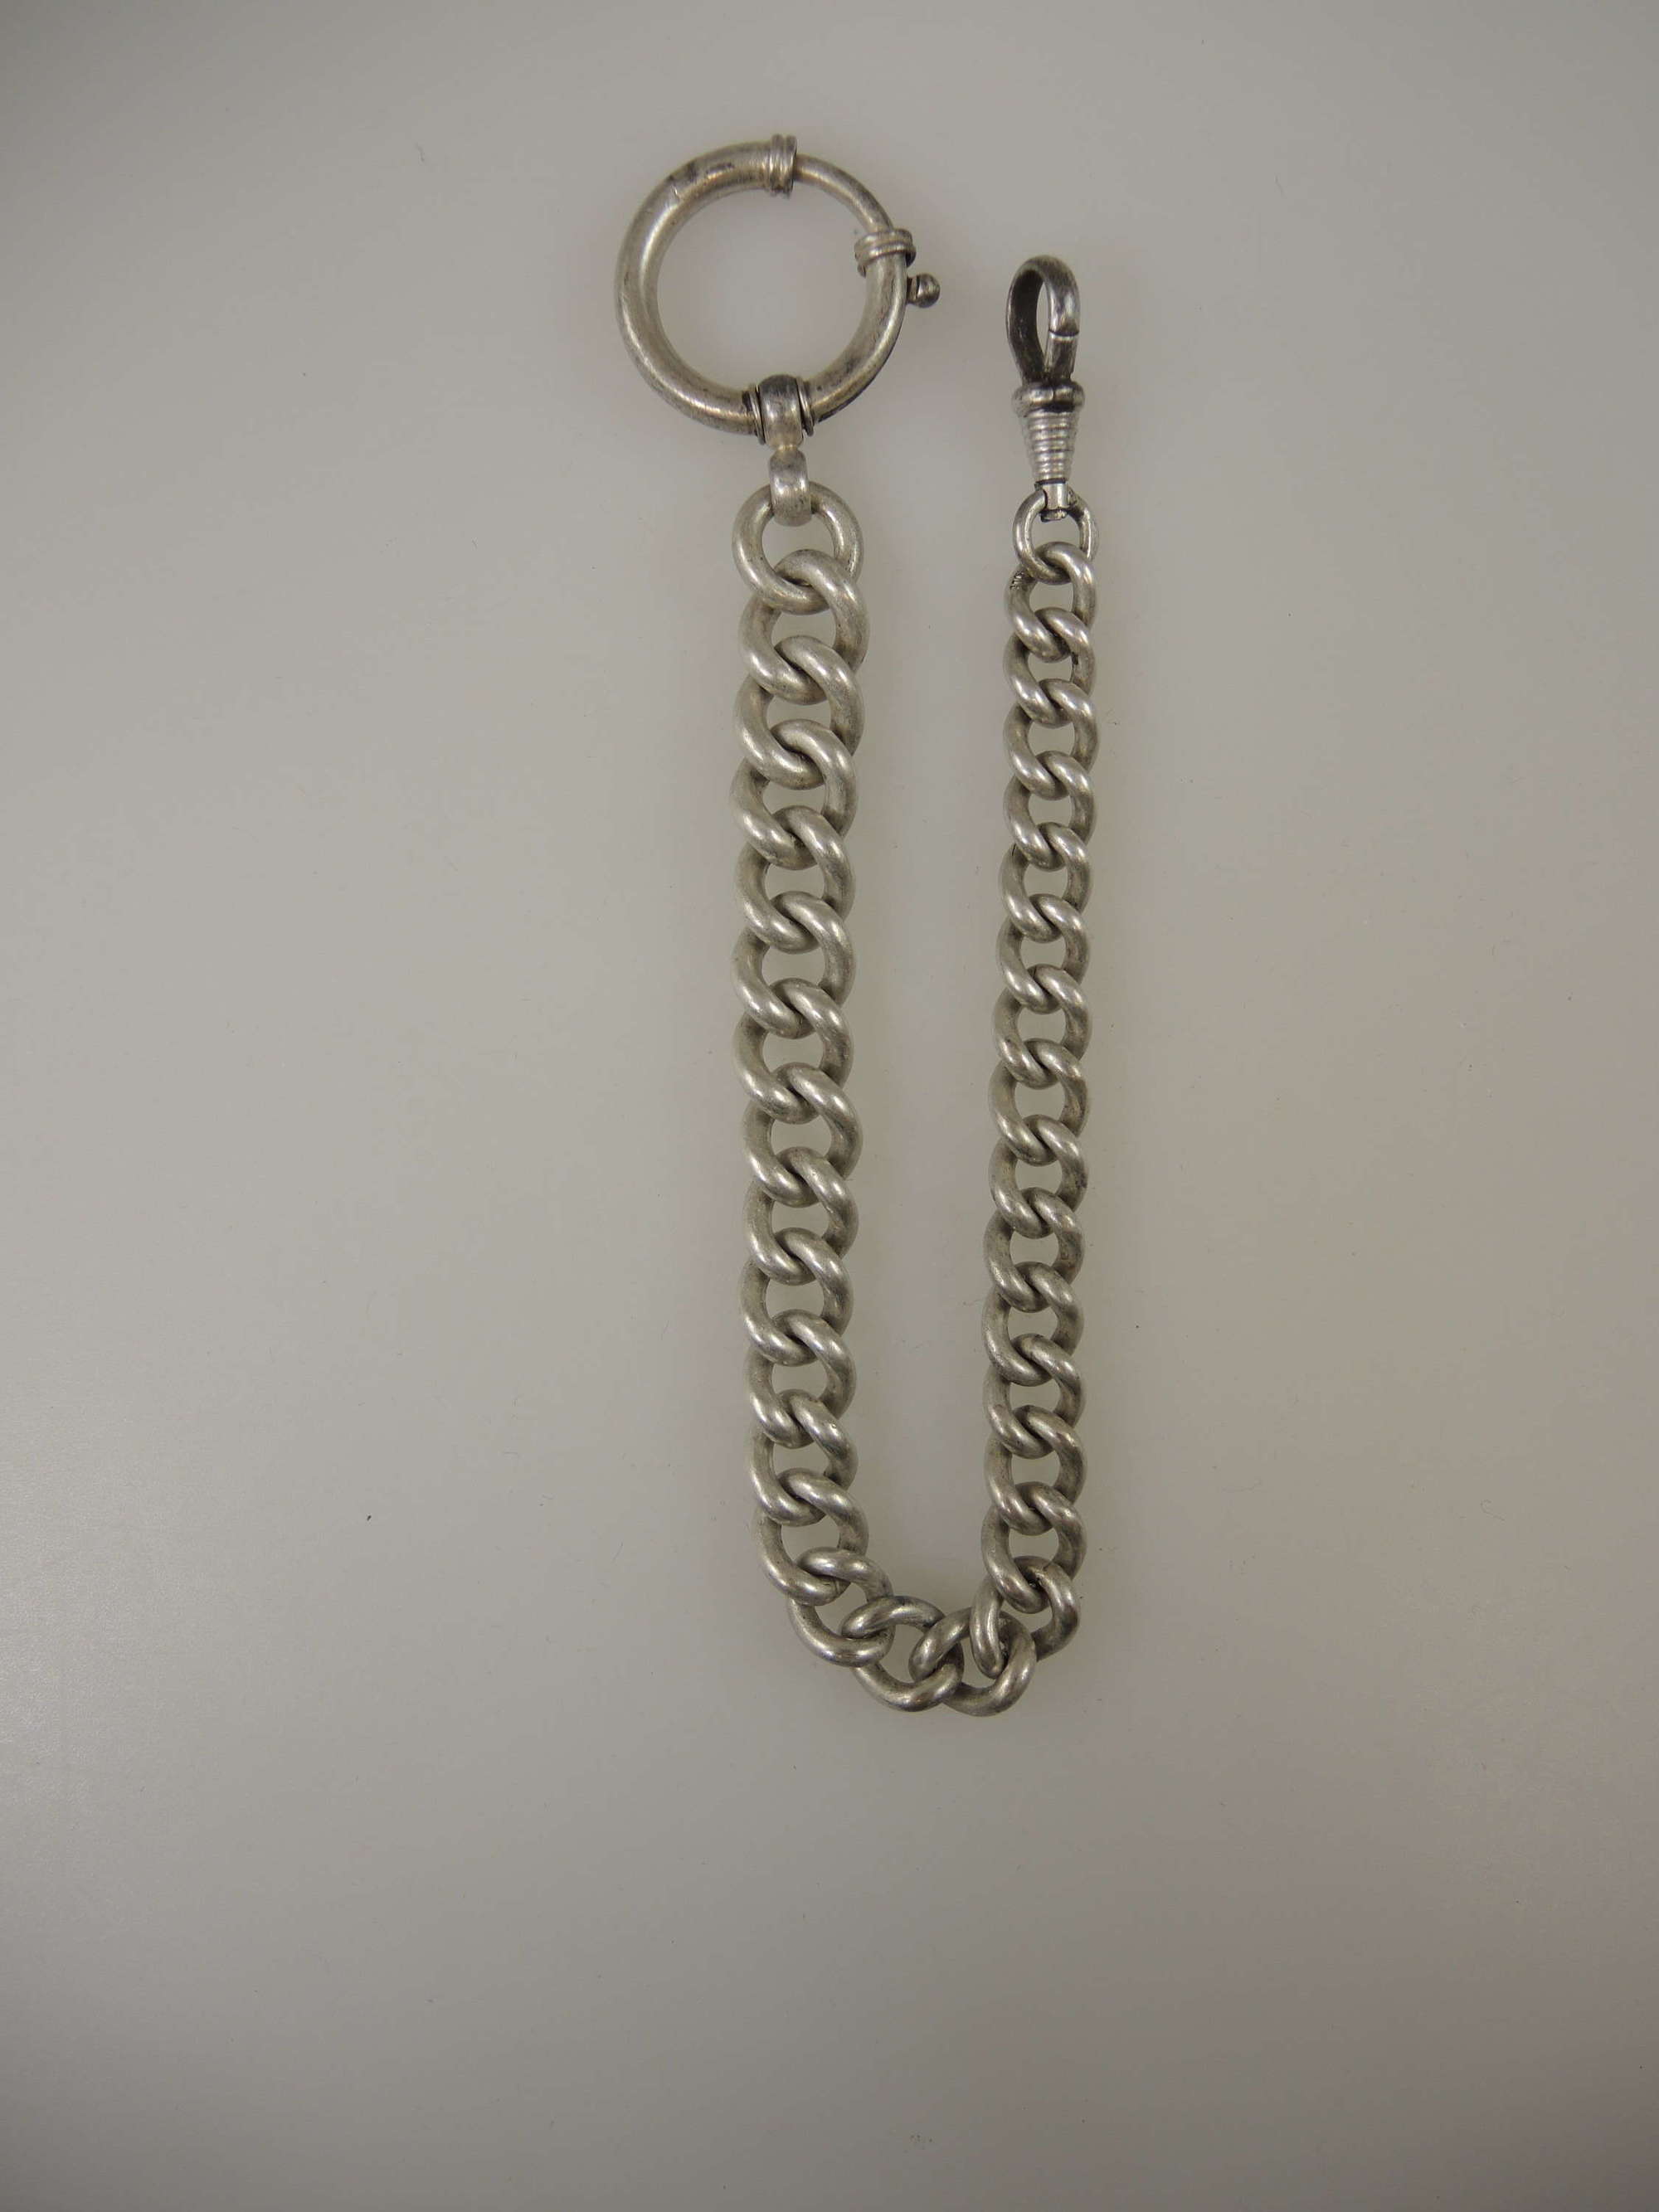 Good quality simple silver watch chain c1890